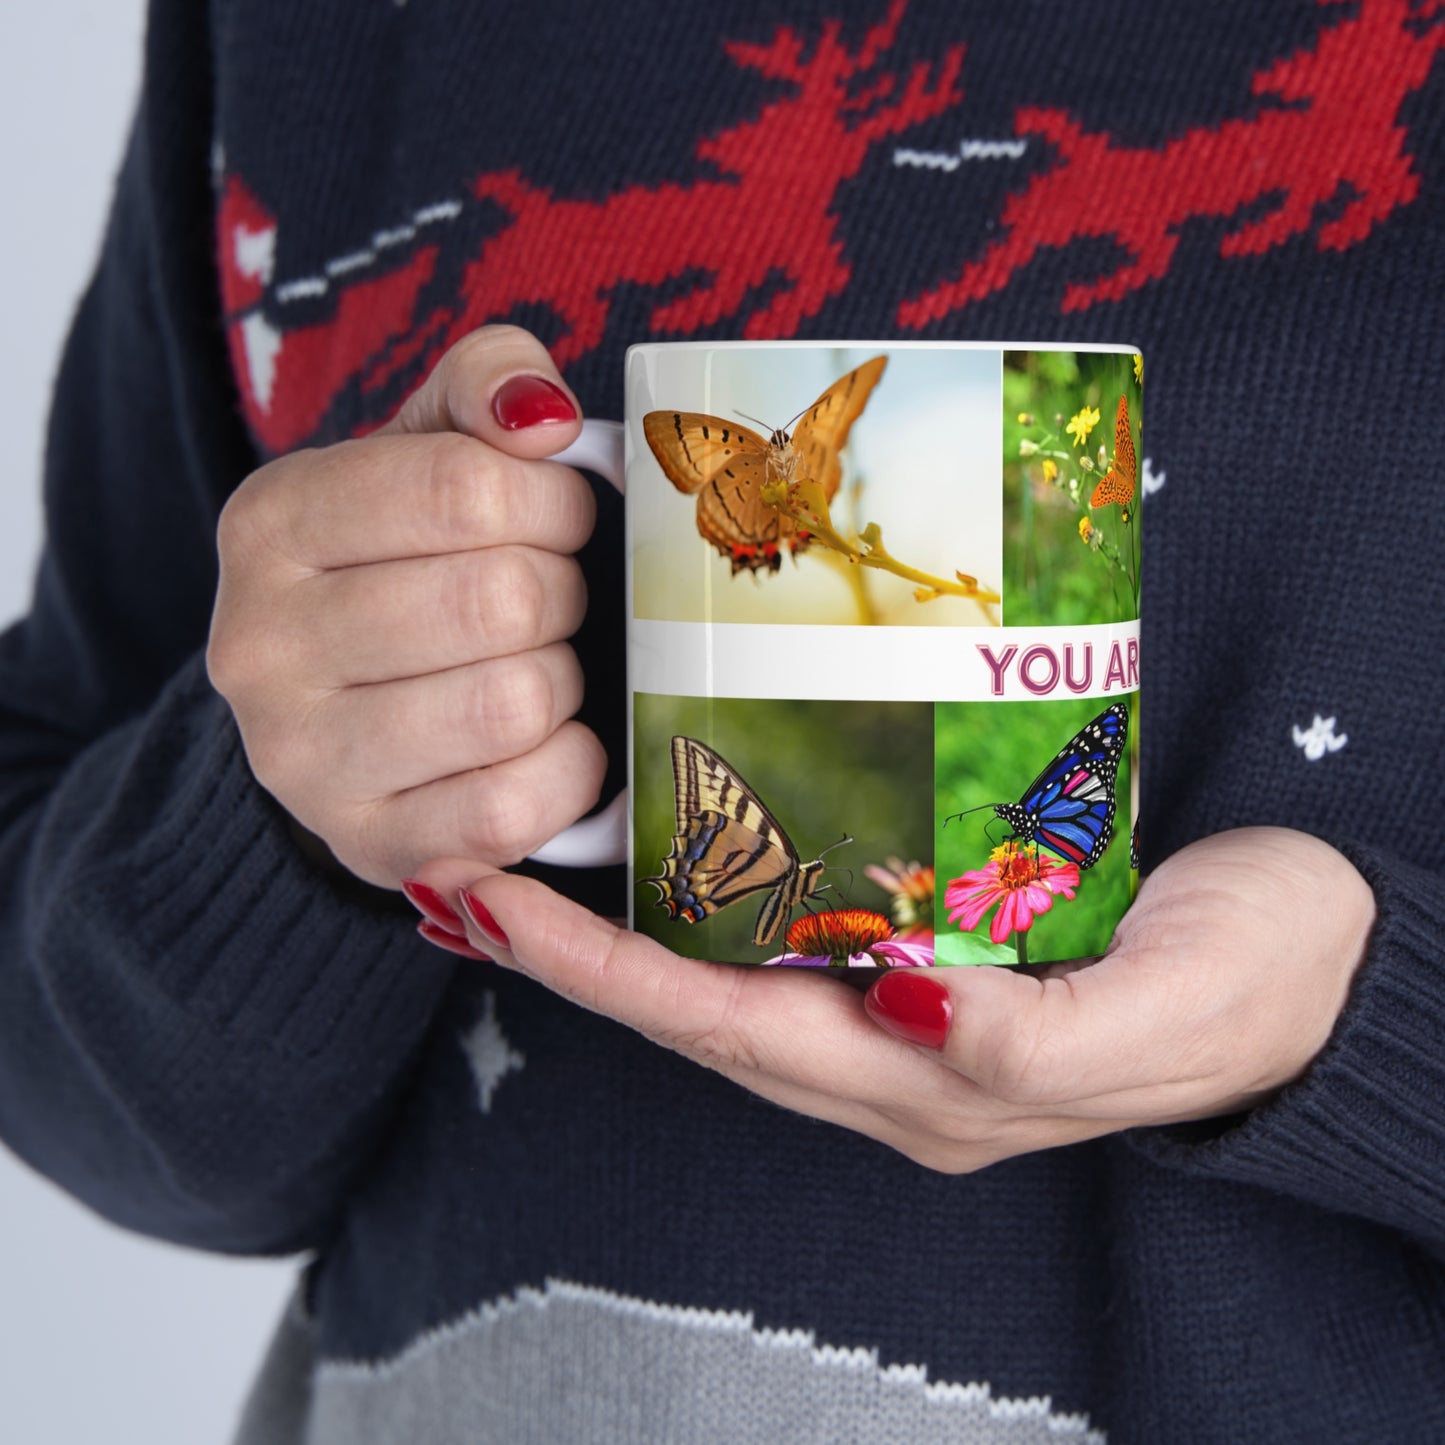 “YOU ARE LOVED” is surrounded by beautiful butterflies. Perfect for that someone special in your life, a friend, family member, colleague or perhaps you want one to keep. There is enough love for everyone!